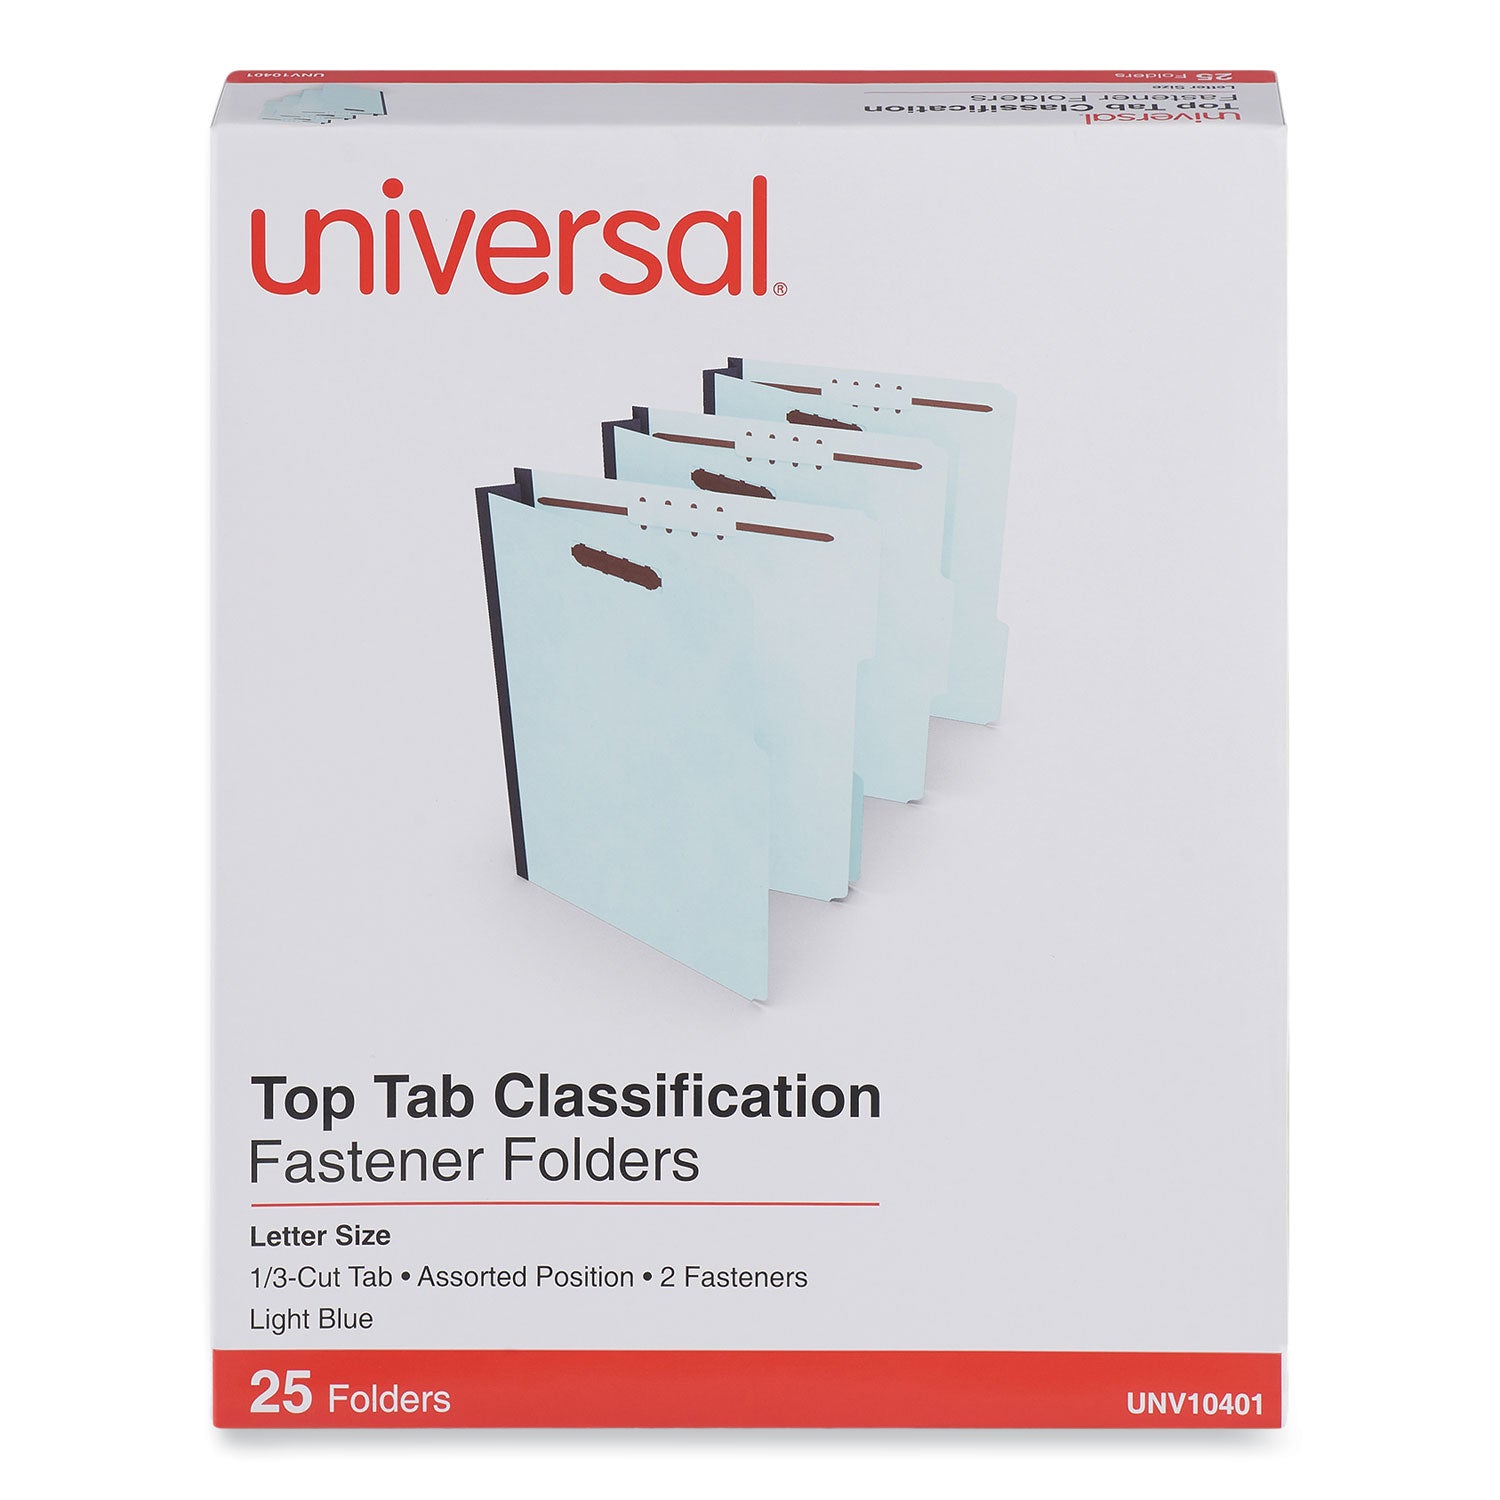 top-tab-classification-folders-2-expansion-2-fasteners-letter-size-light-blue-exterior-25-box_unv10401 - 2